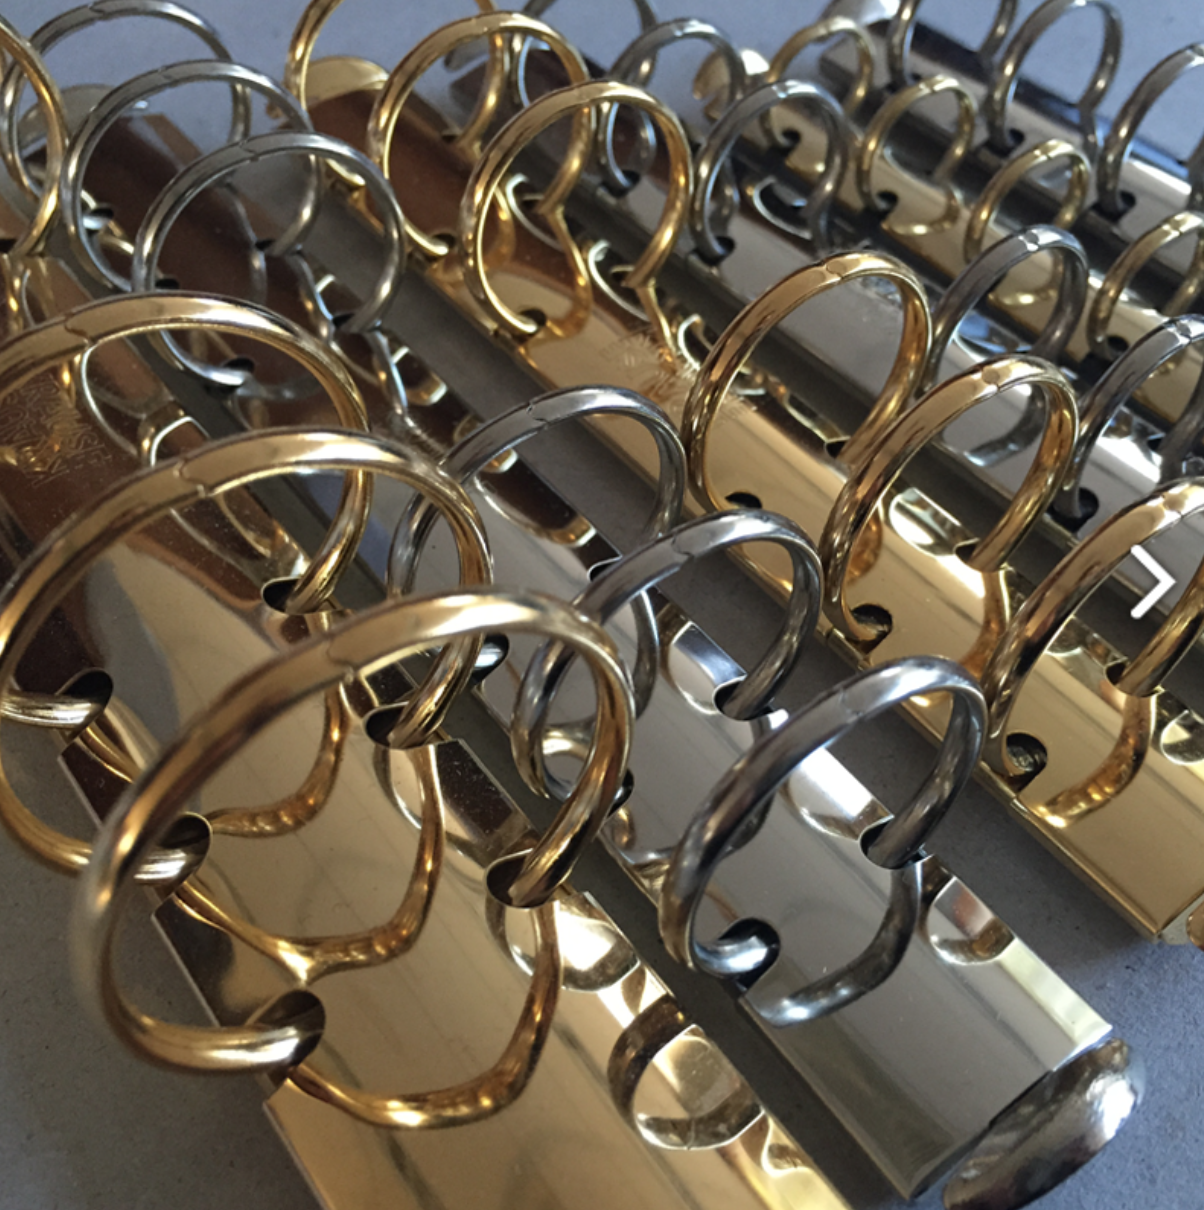 Switching out Louis Vuitton PM Agenda Rings To 16mm Krause Rings